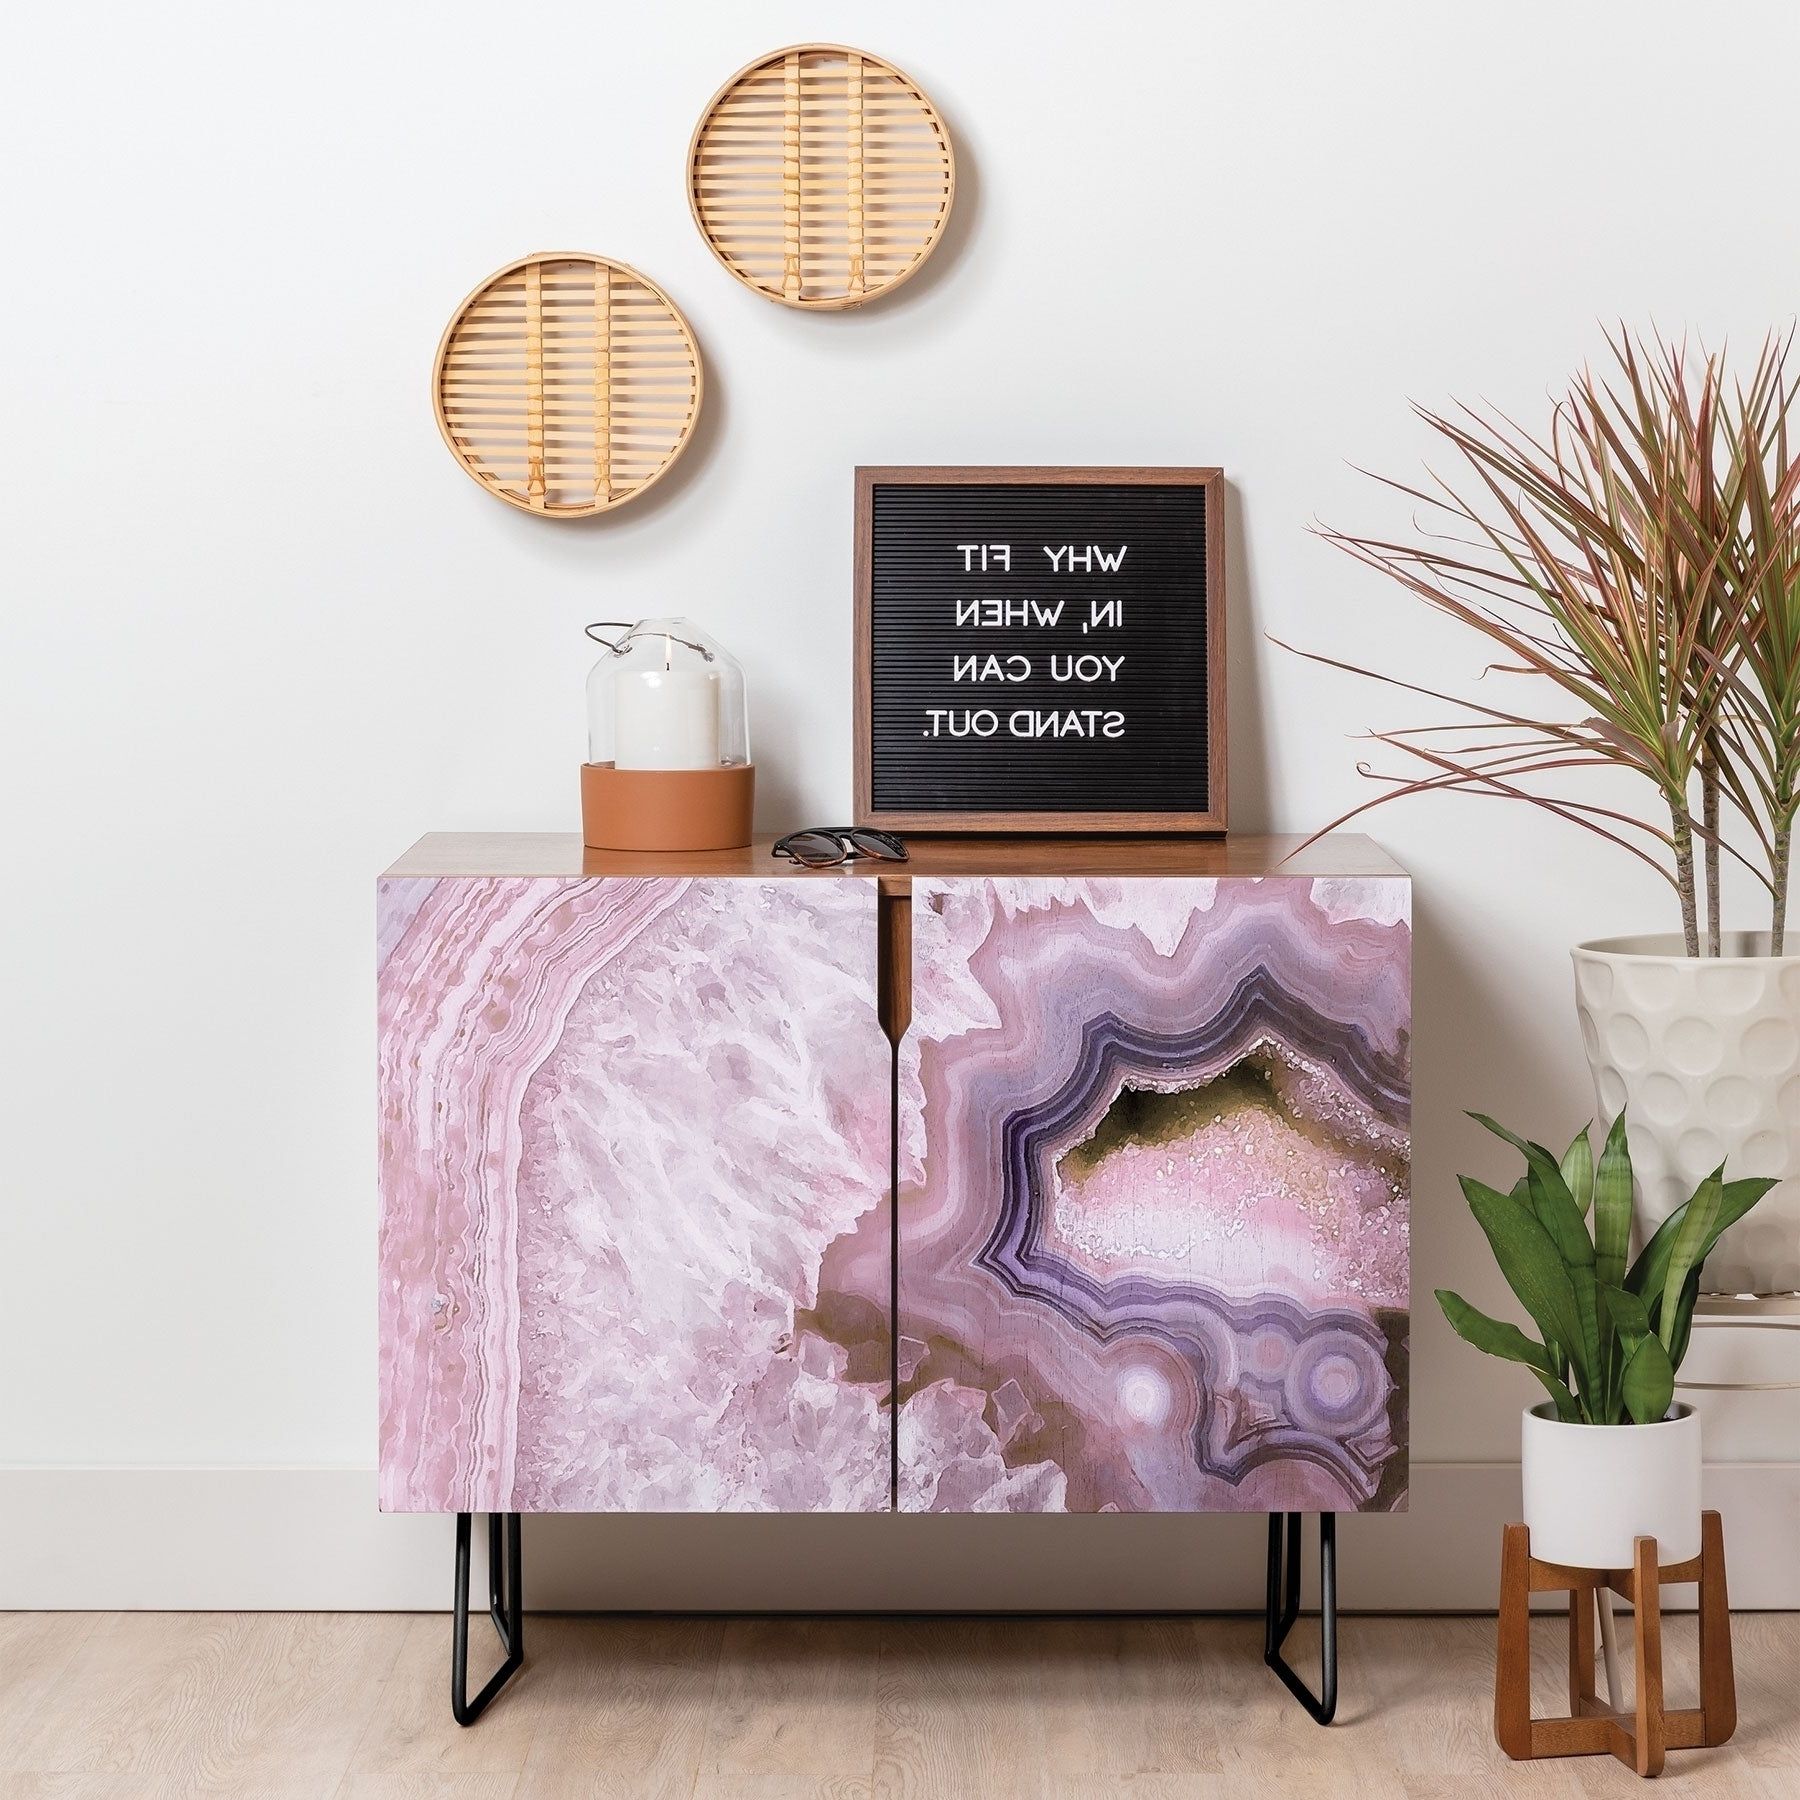 Deny Designs Pale Pink Agate Wood Credenza (3 Leg Options) Throughout Pale Pink Agate Wood Credenzas (View 3 of 20)